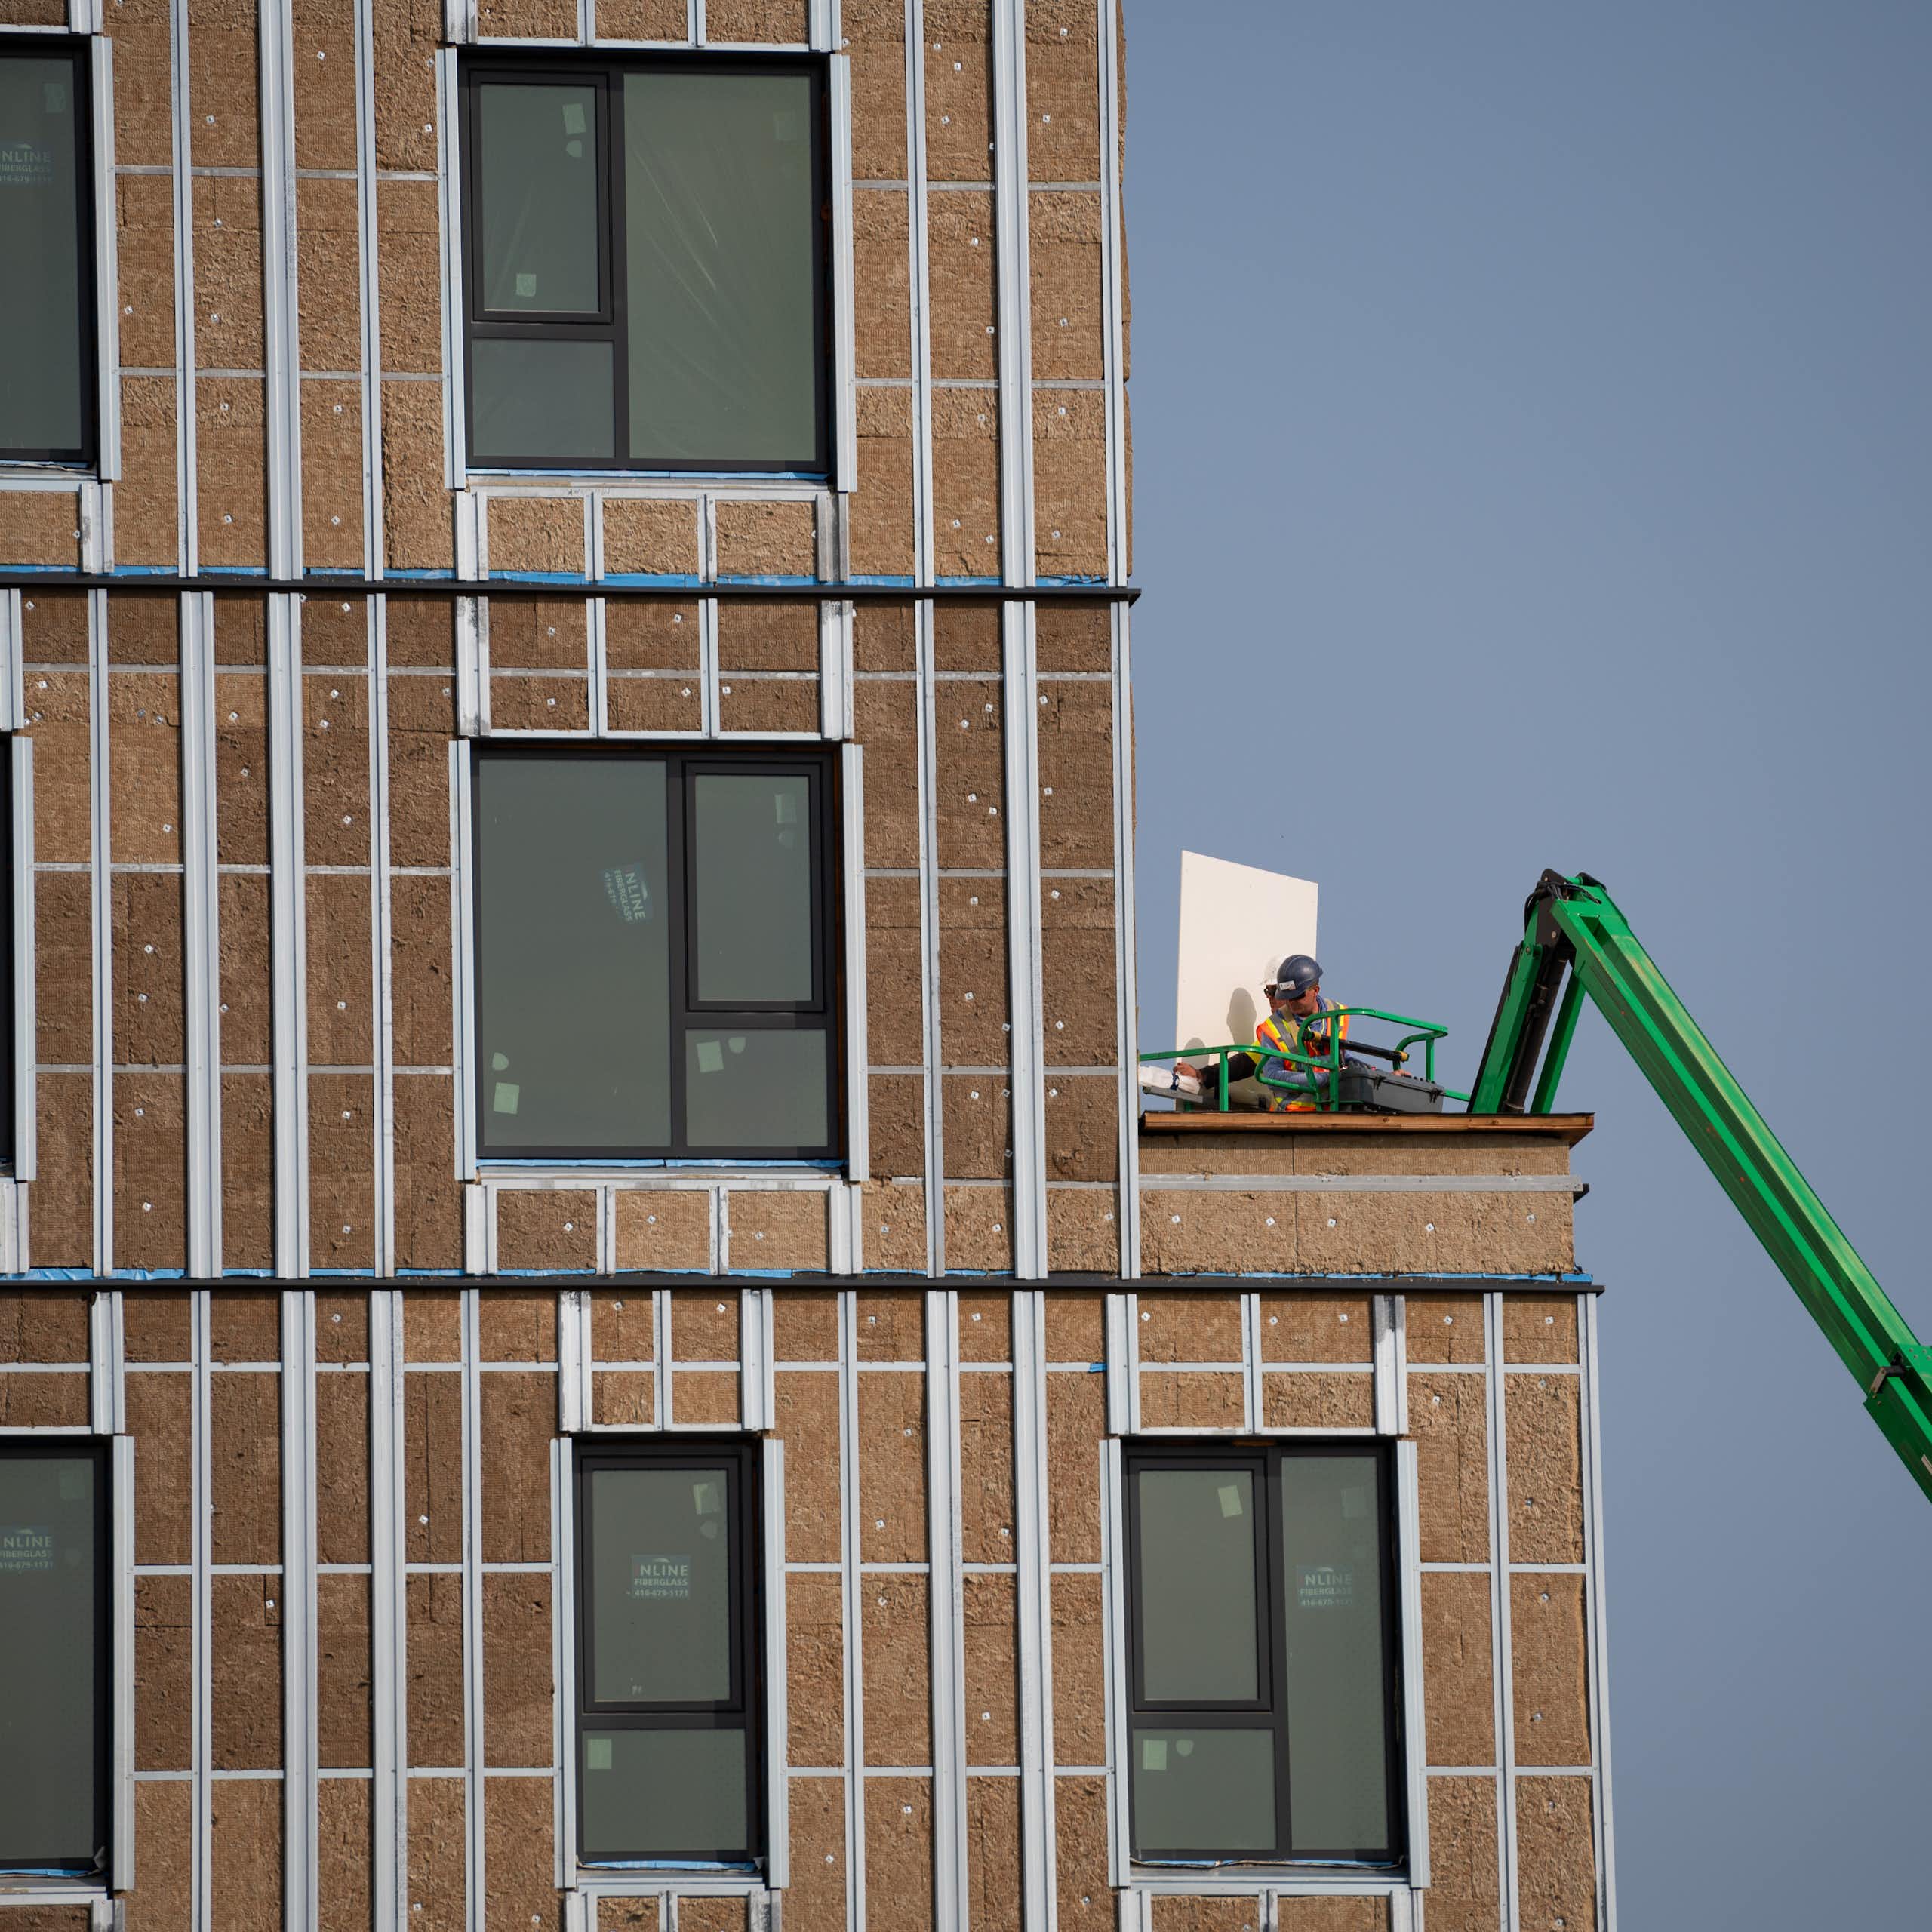 A construction worker uses a boom lift to move materials at a building under construction.